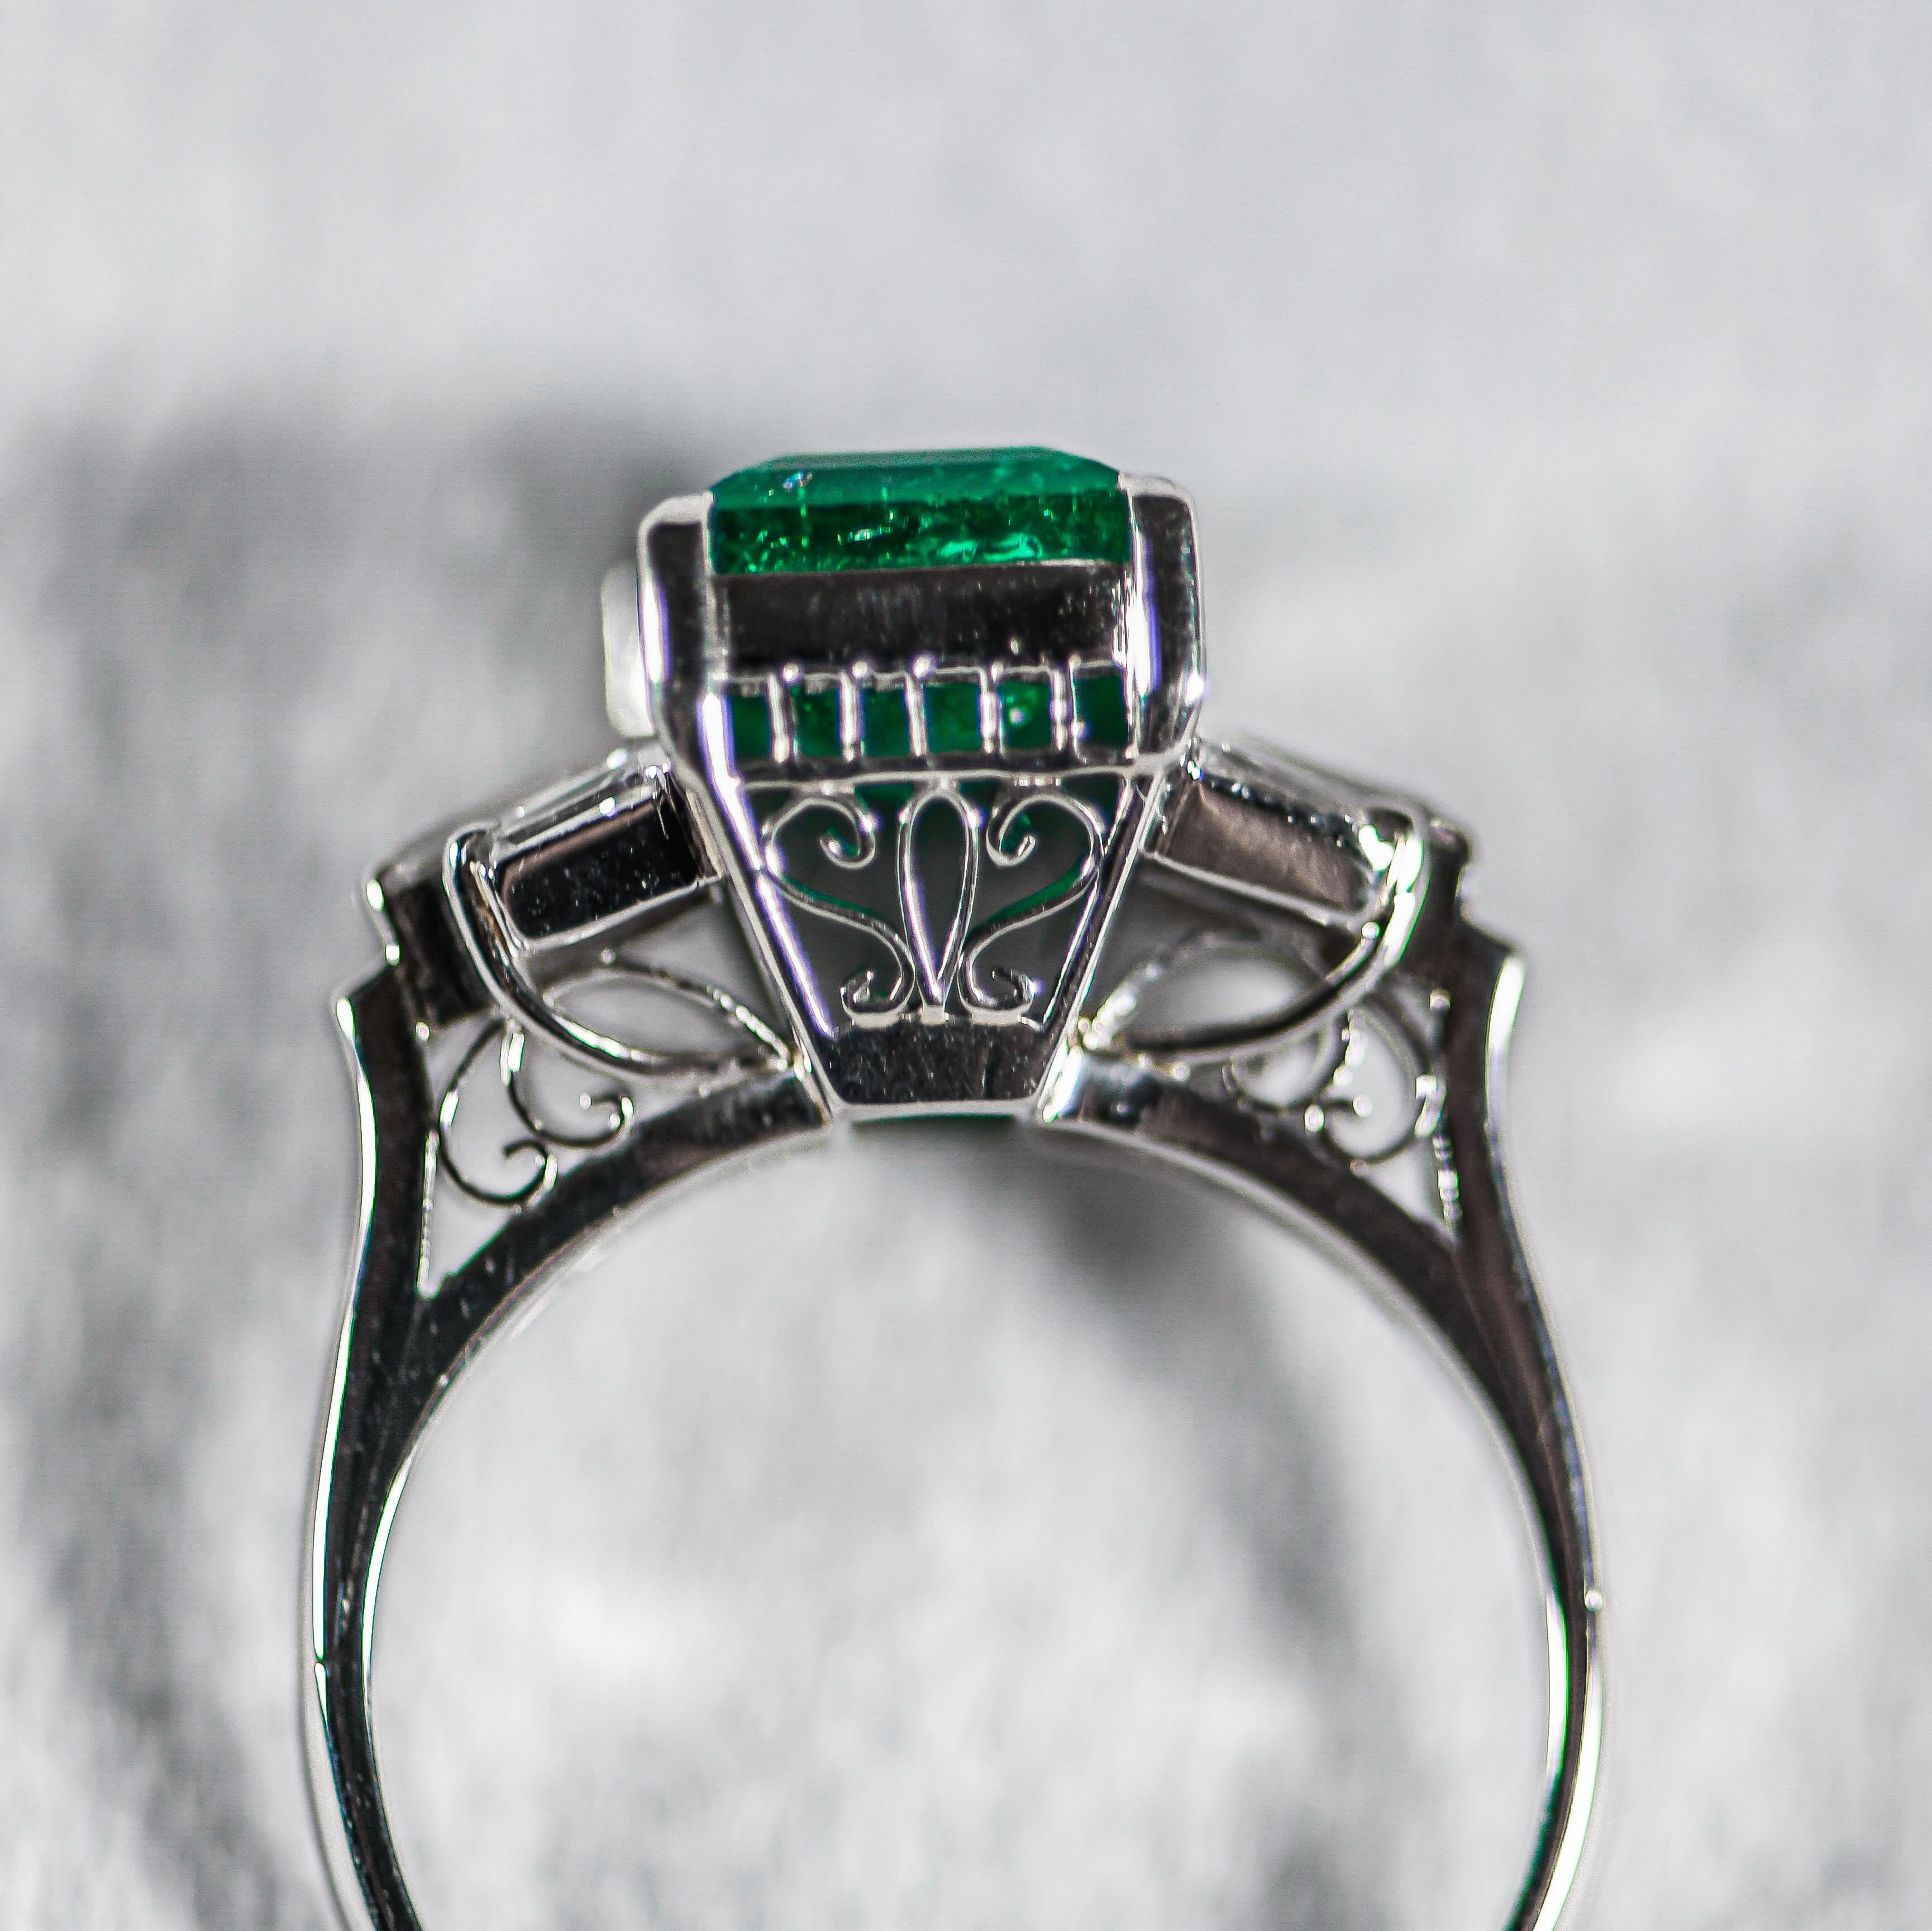  The birthstone for May and the gemstone desired in every fine jewelry collection!  This stunning emerald cut emerald is the focal point in a classic platinum setting!  2.35 carats is an impressive look! Side diamonds have an additional total weight